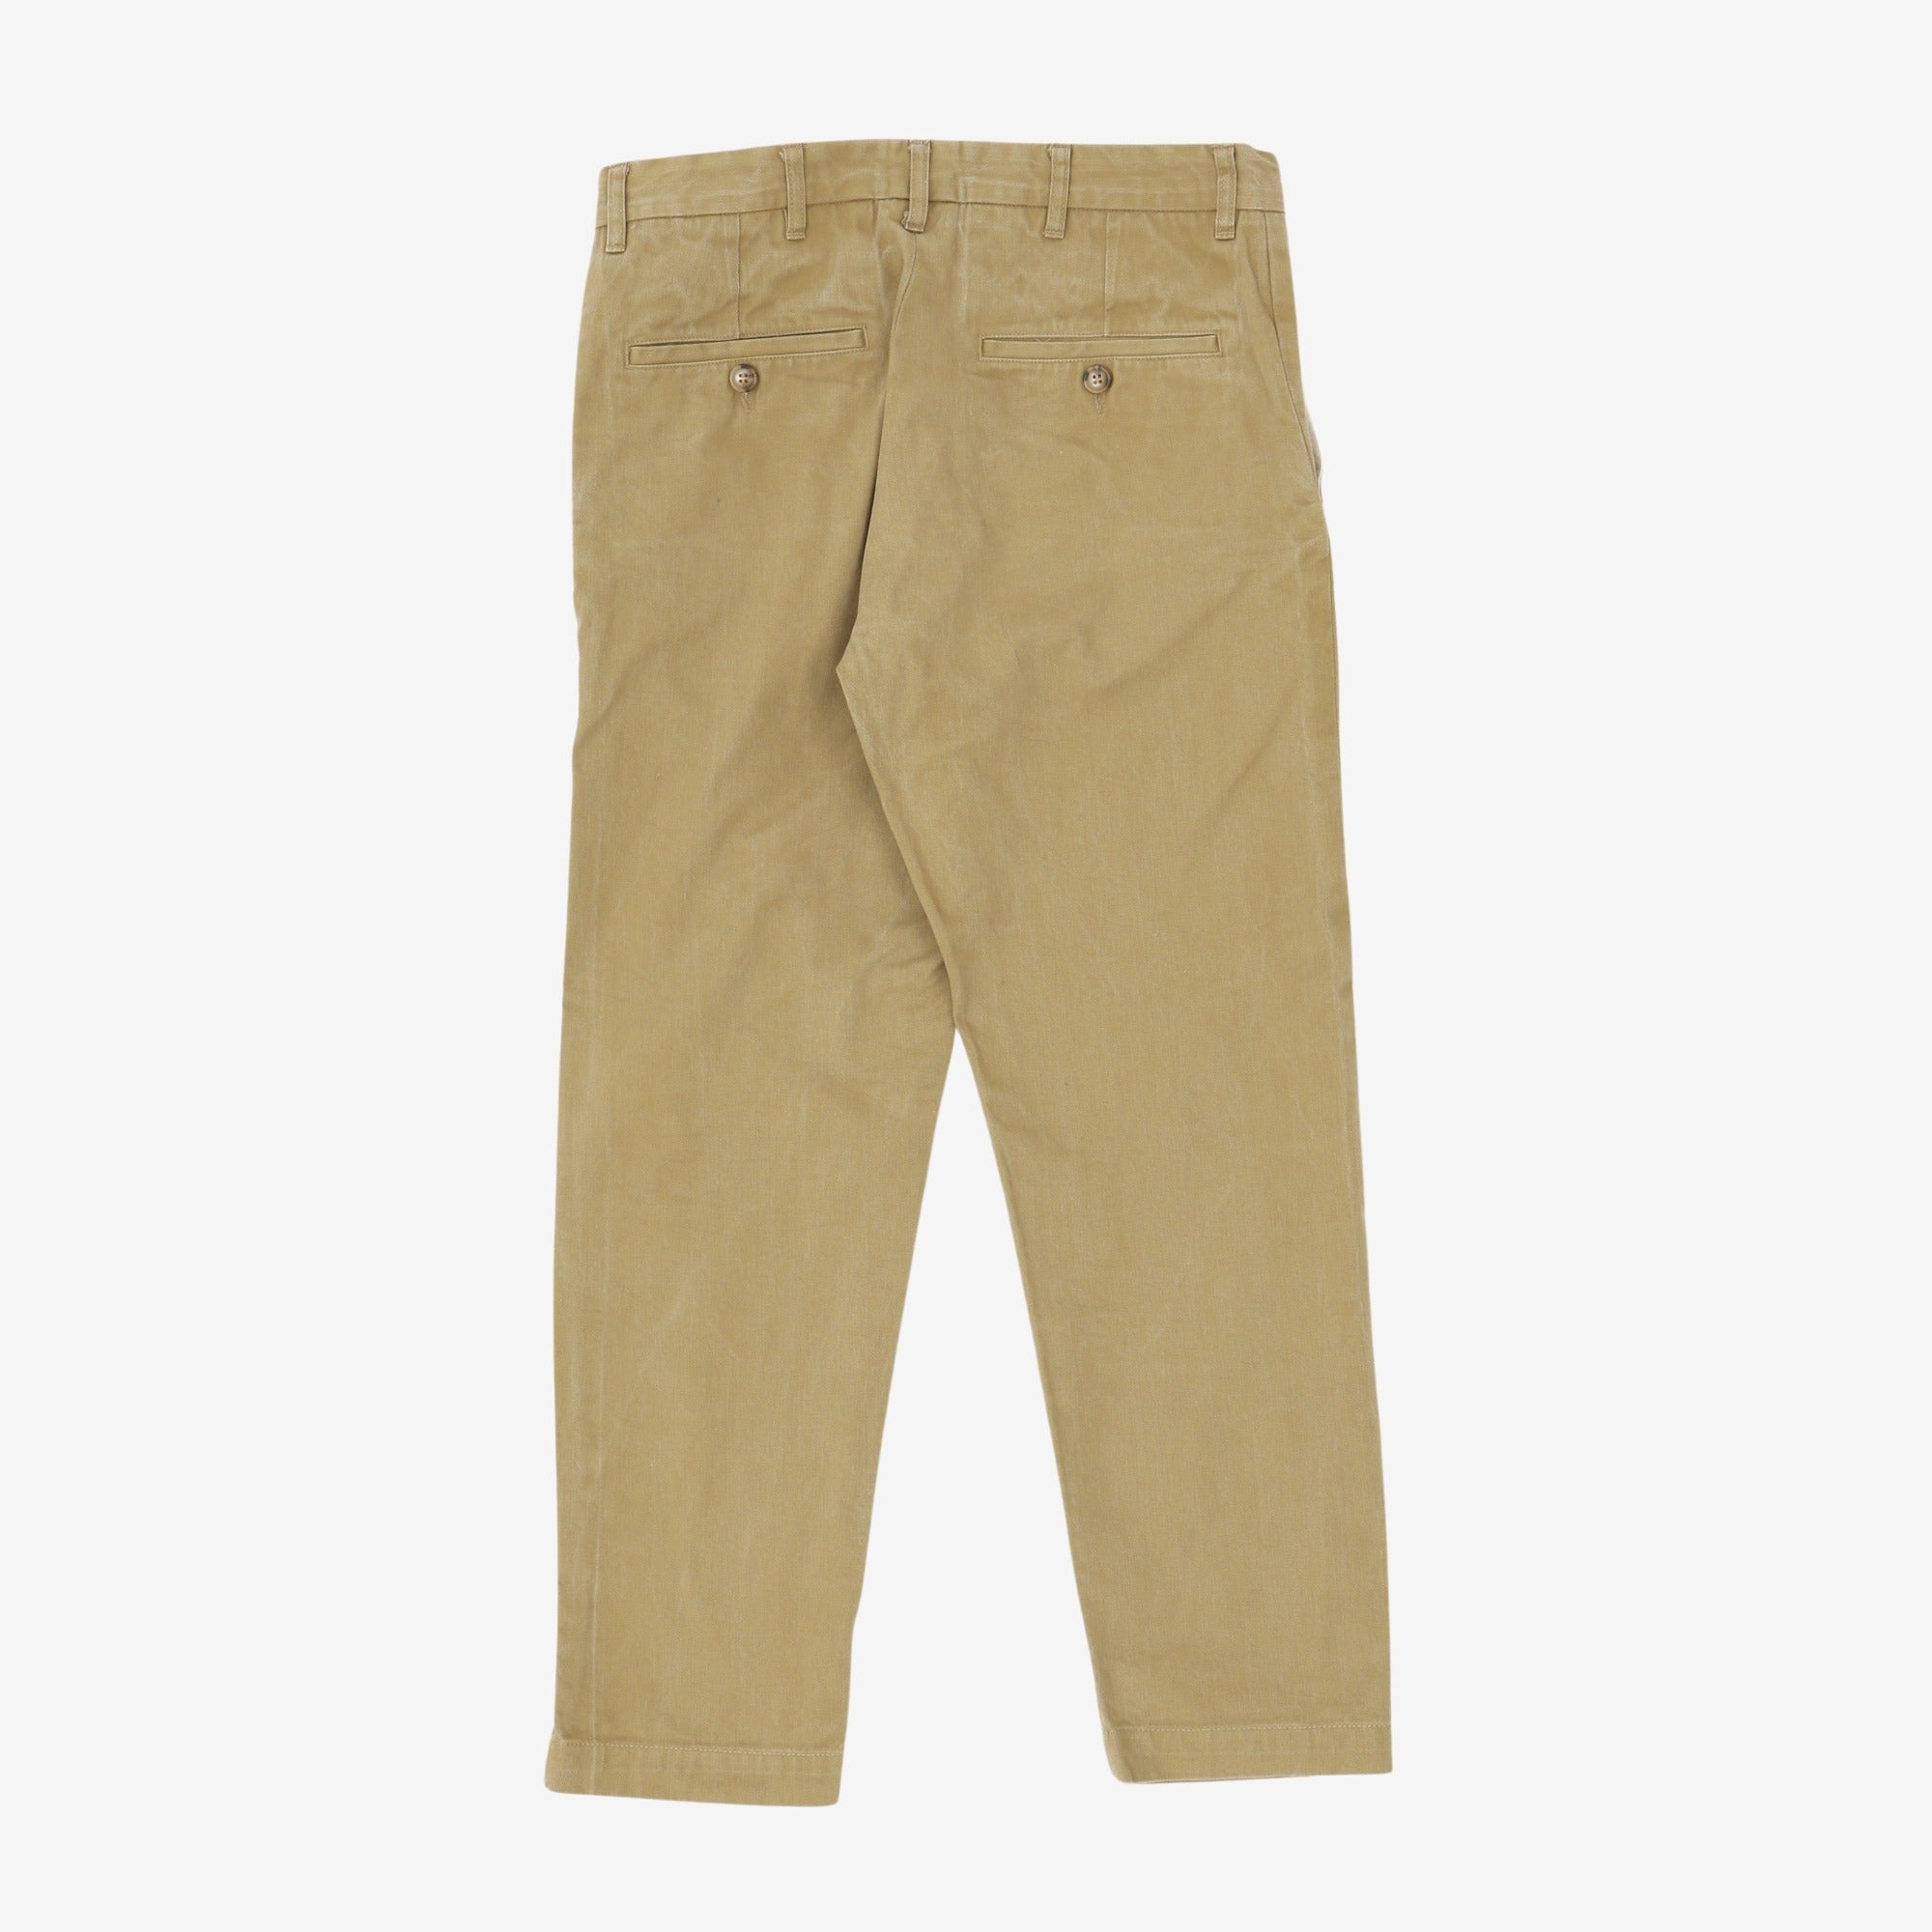 W11 Tapered Chinos (34W x 30L)